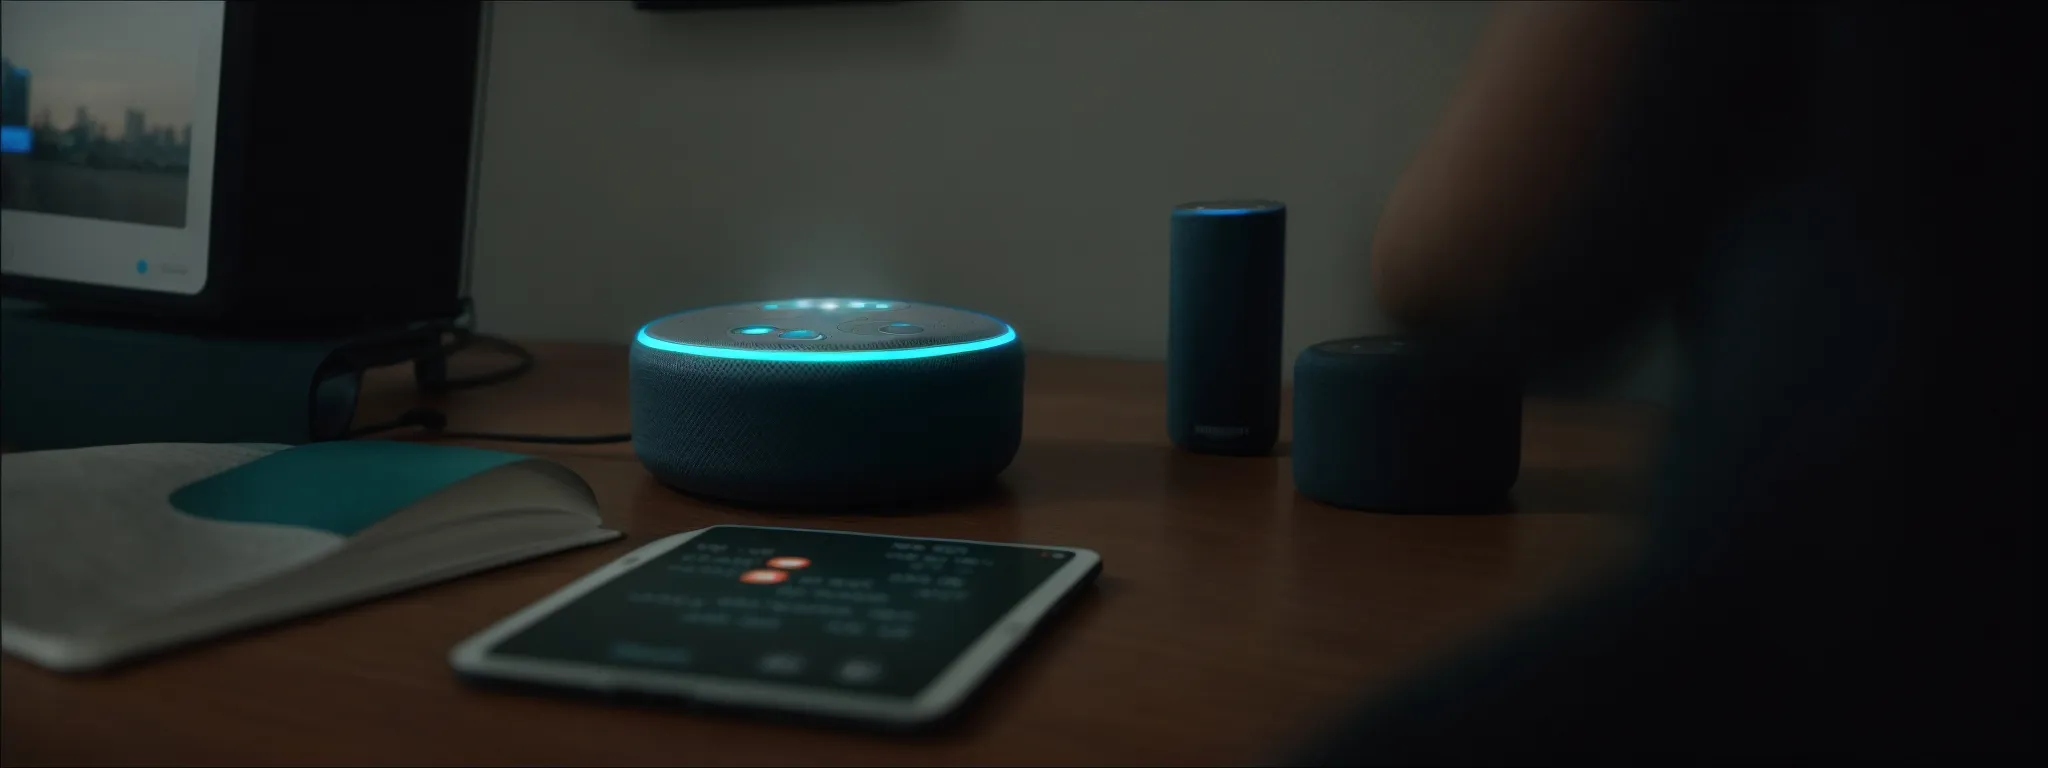 a person speaks into an amazon echo device, activating alexa for a voice search.